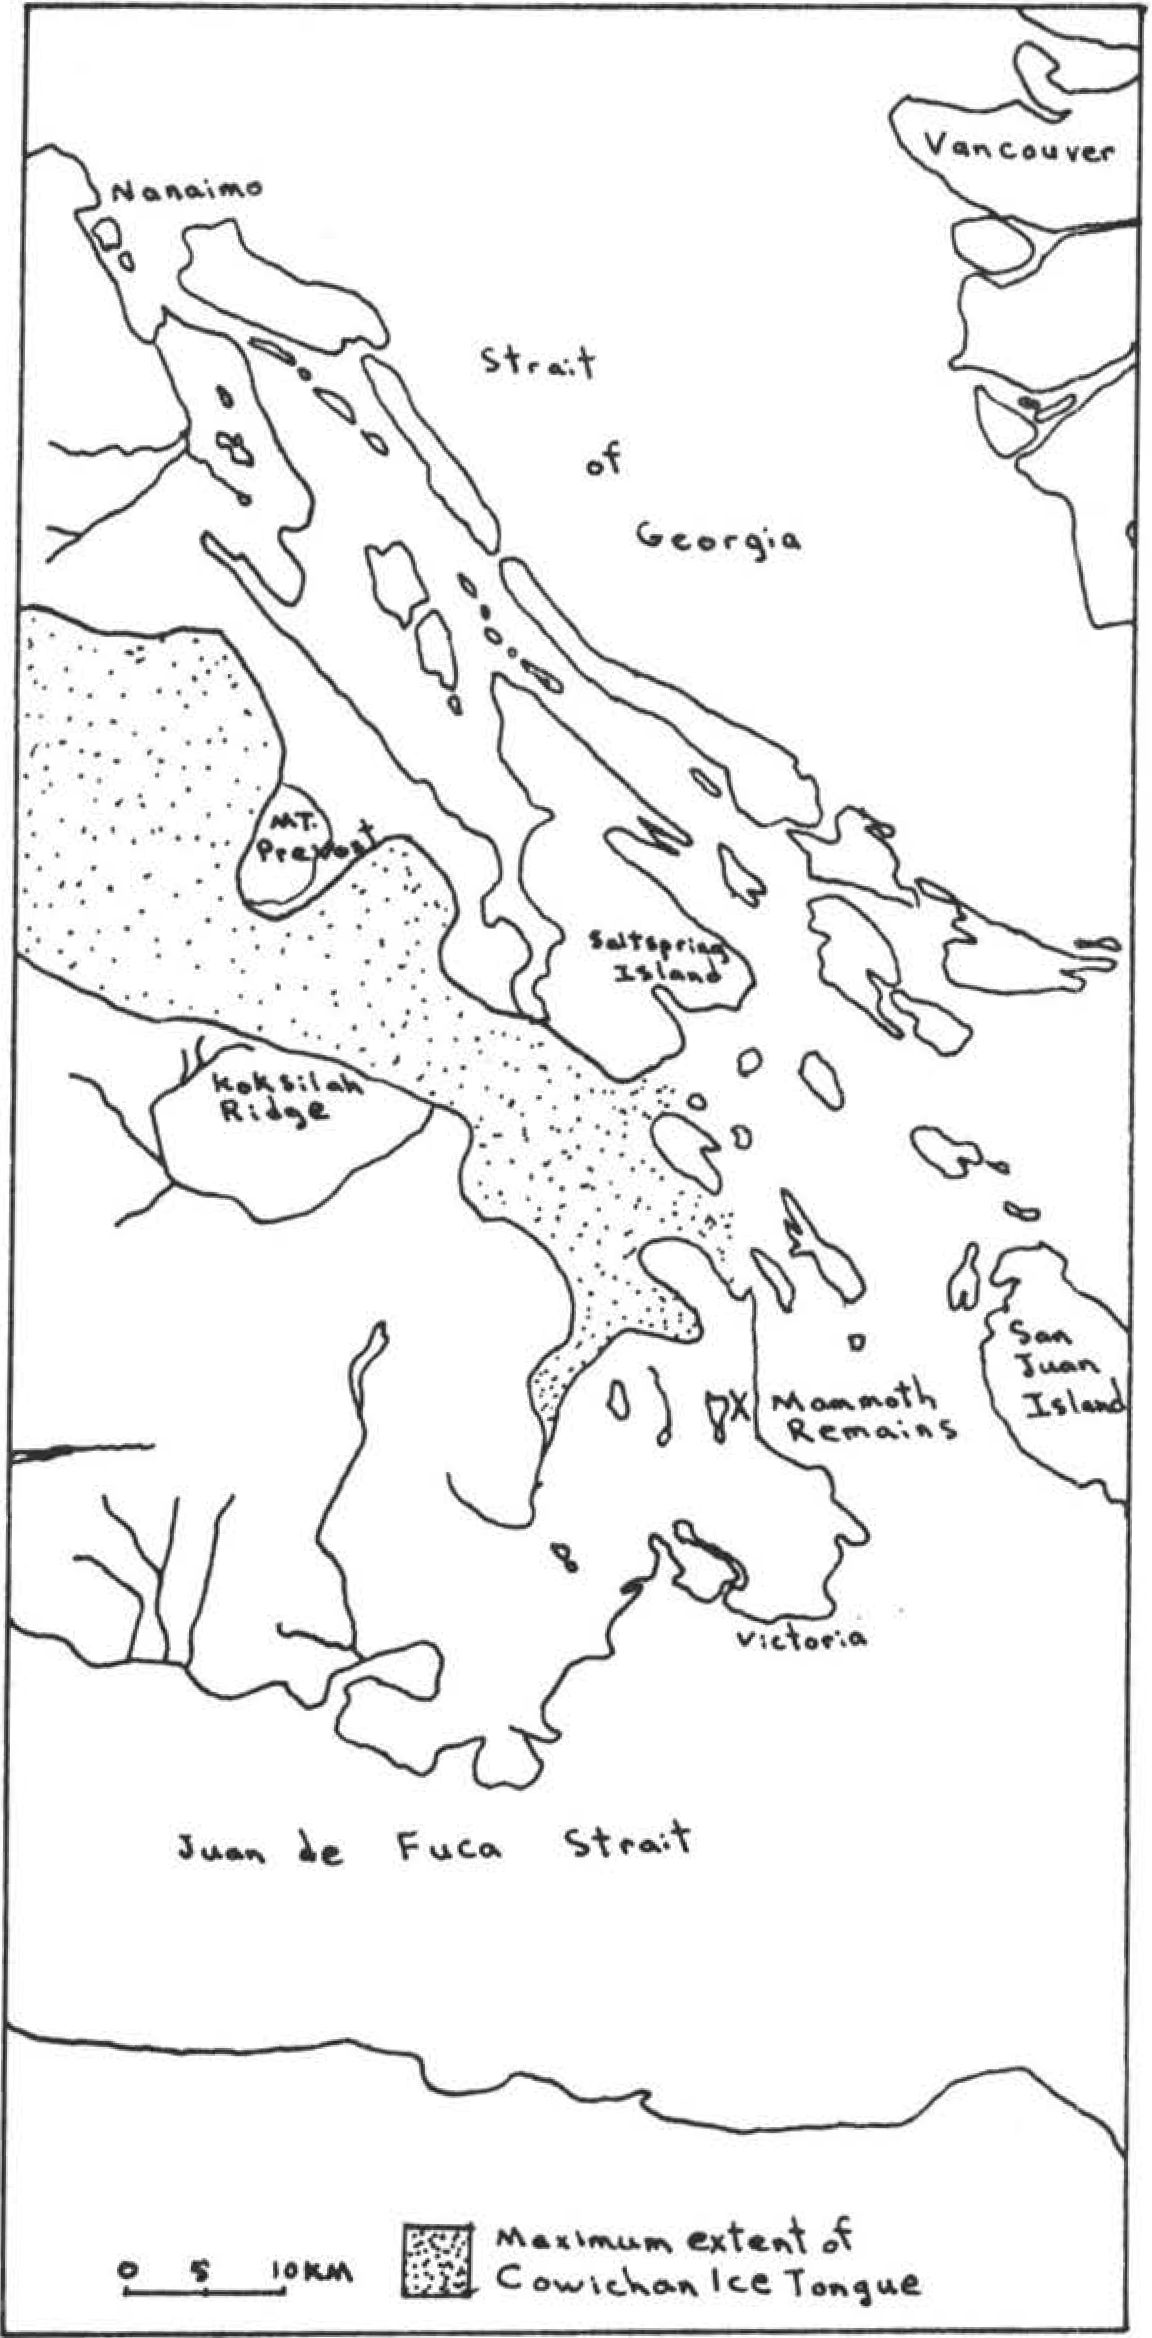 The Late lce Age of Southern Vancouver Island